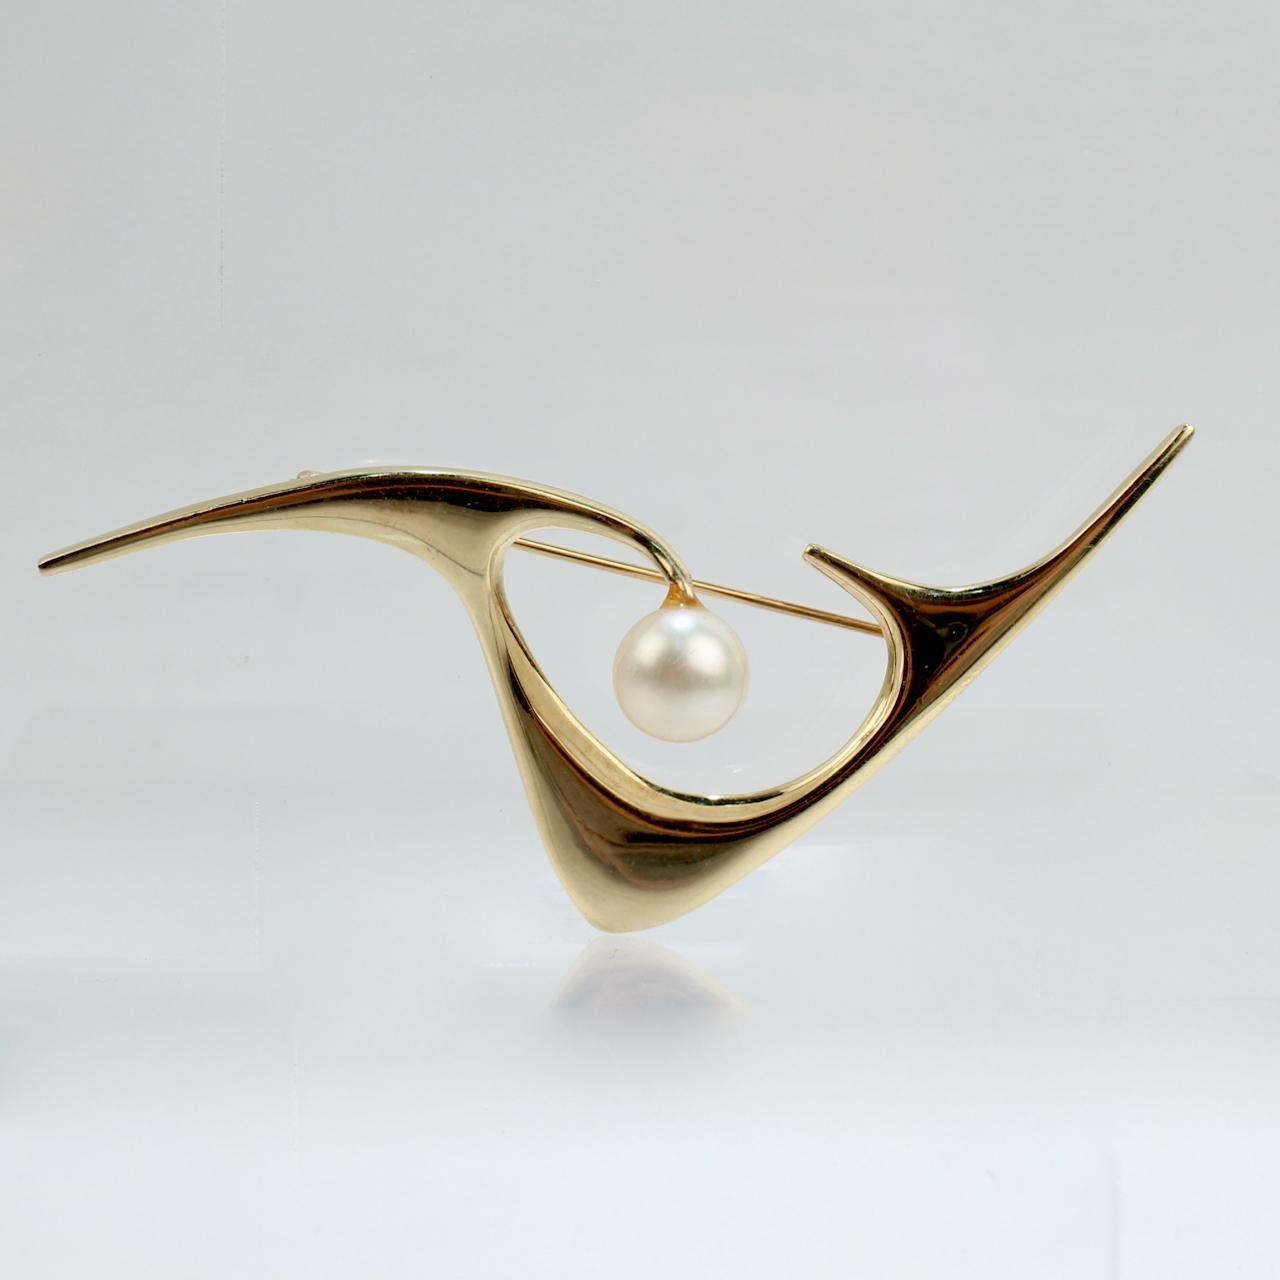 A very fine brooch by Ed Wiener.

Additional Details:
In 14k gold and set with cultured round white pearl.

Great Modernism from one of New York City's most important Mid-Century jewelry makers!

Date:
Mid-20th Century

Overall Condition:
It is in